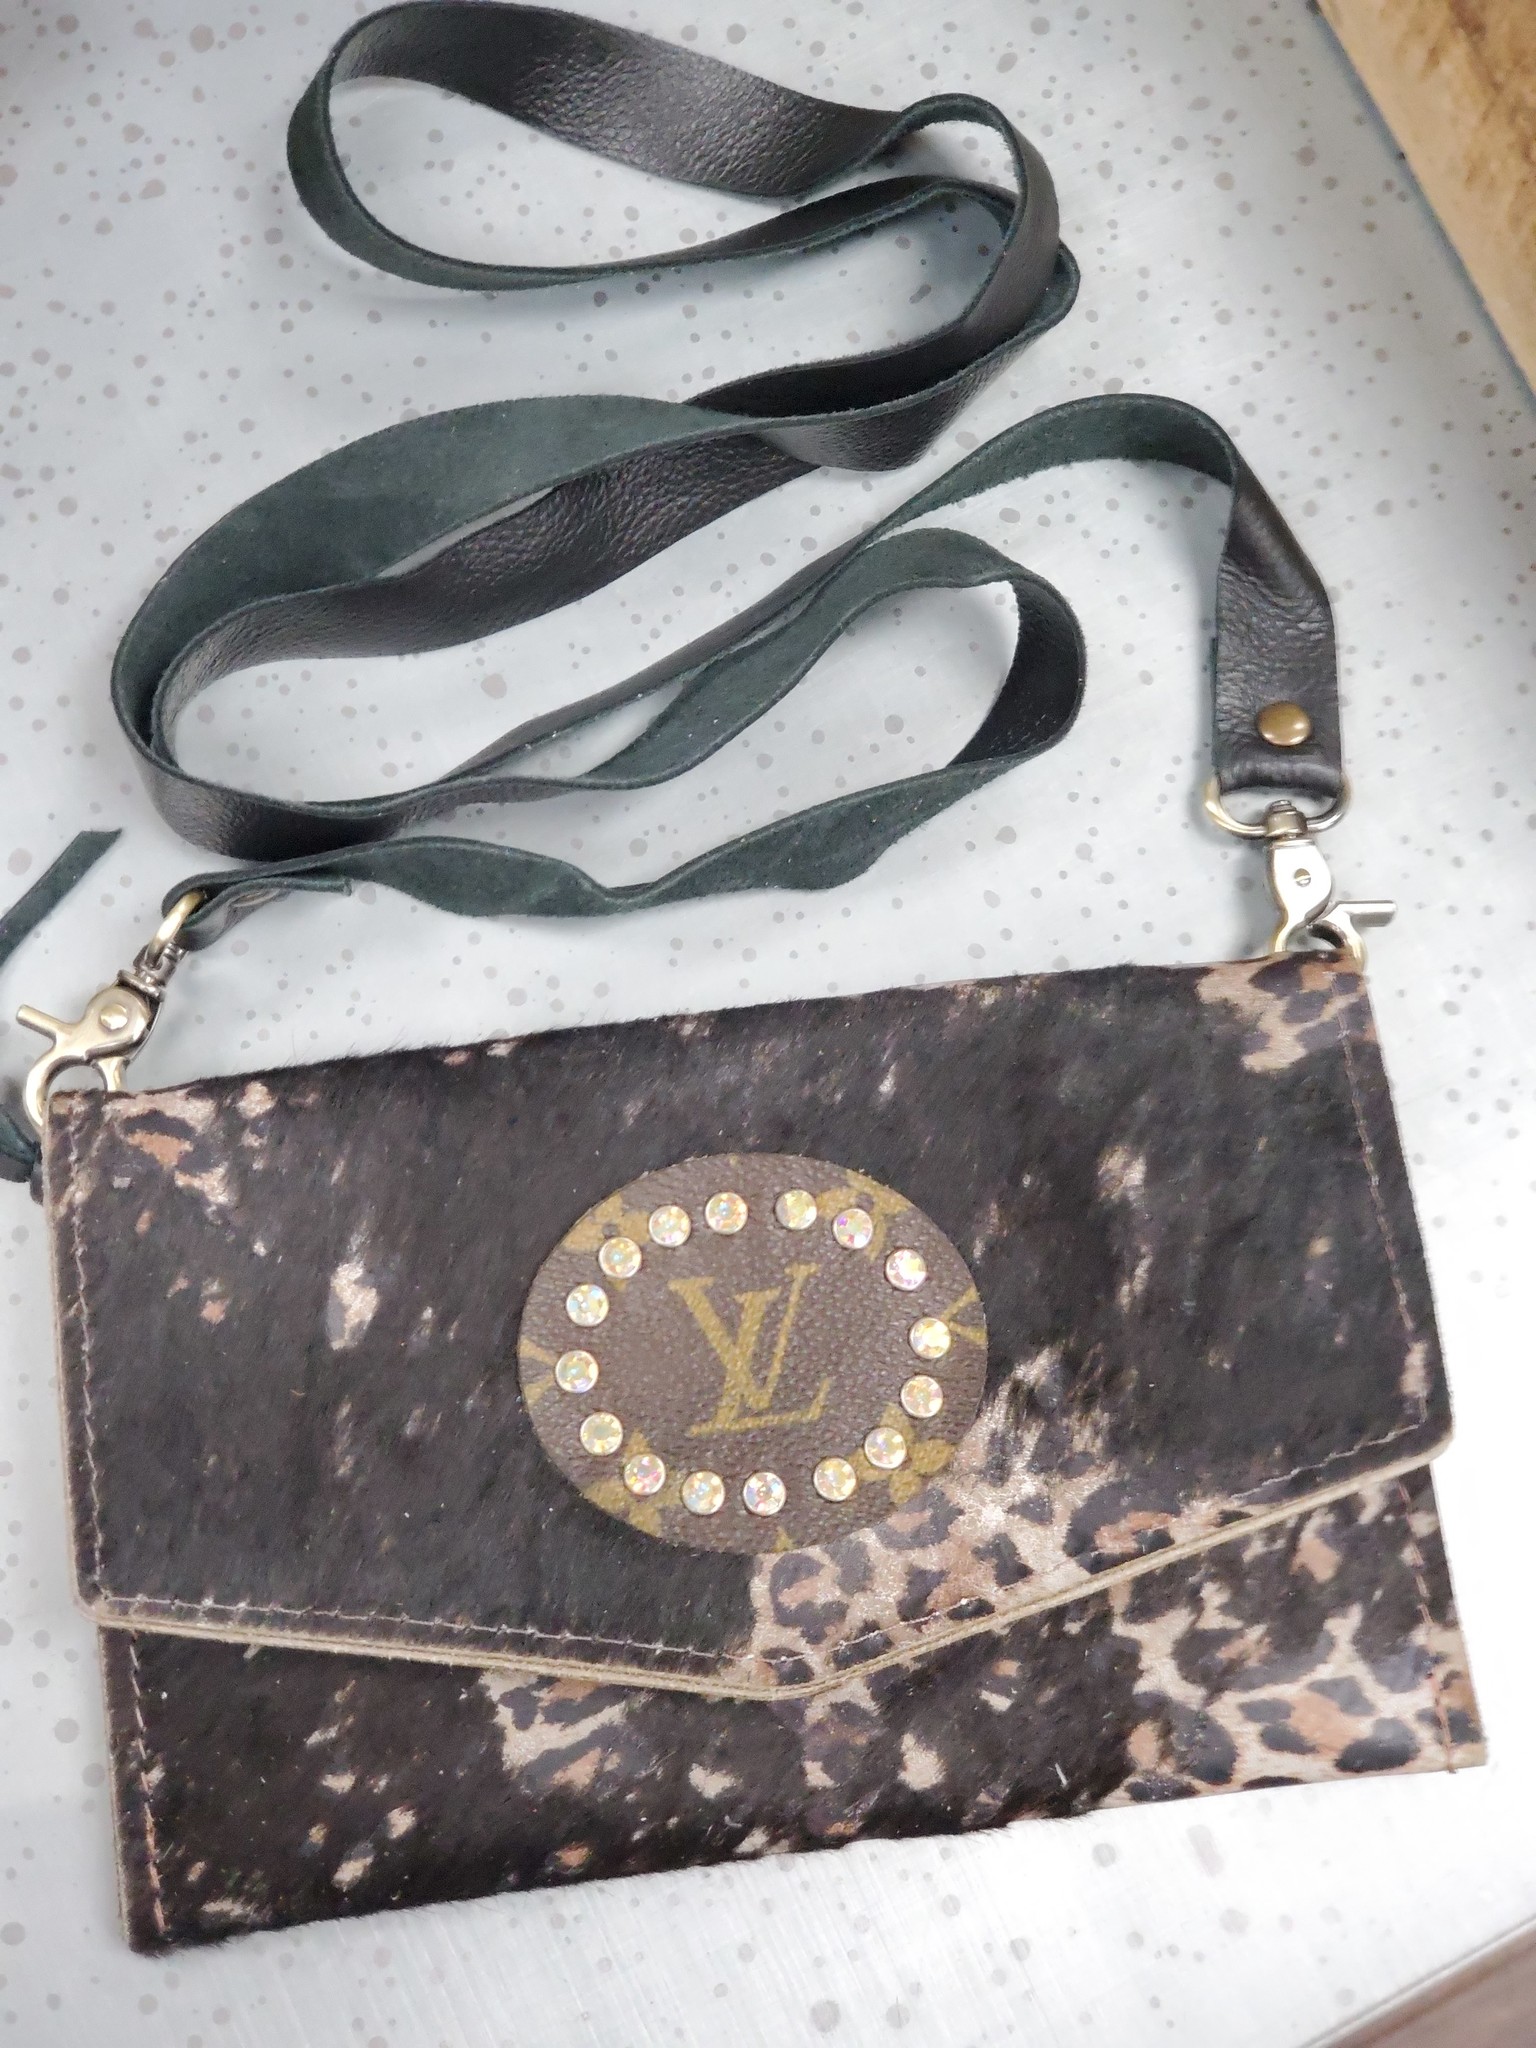 Keep It Gypsy Upcycled LV Leather &Leopard Hide Crossbody